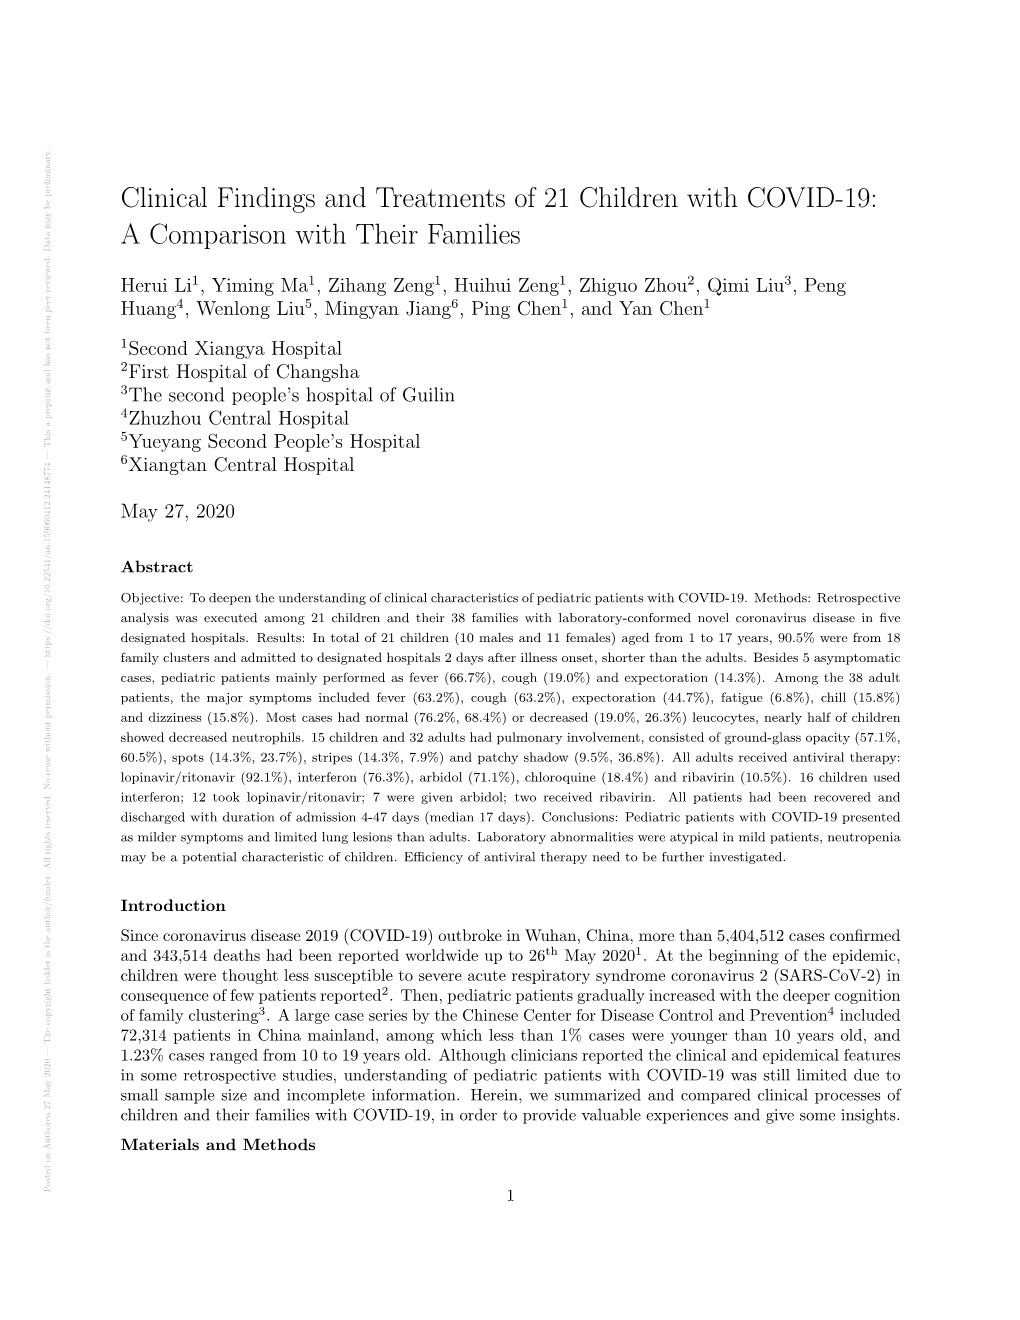 Clinical Findings and Treatments of 21 Children with COVID-19